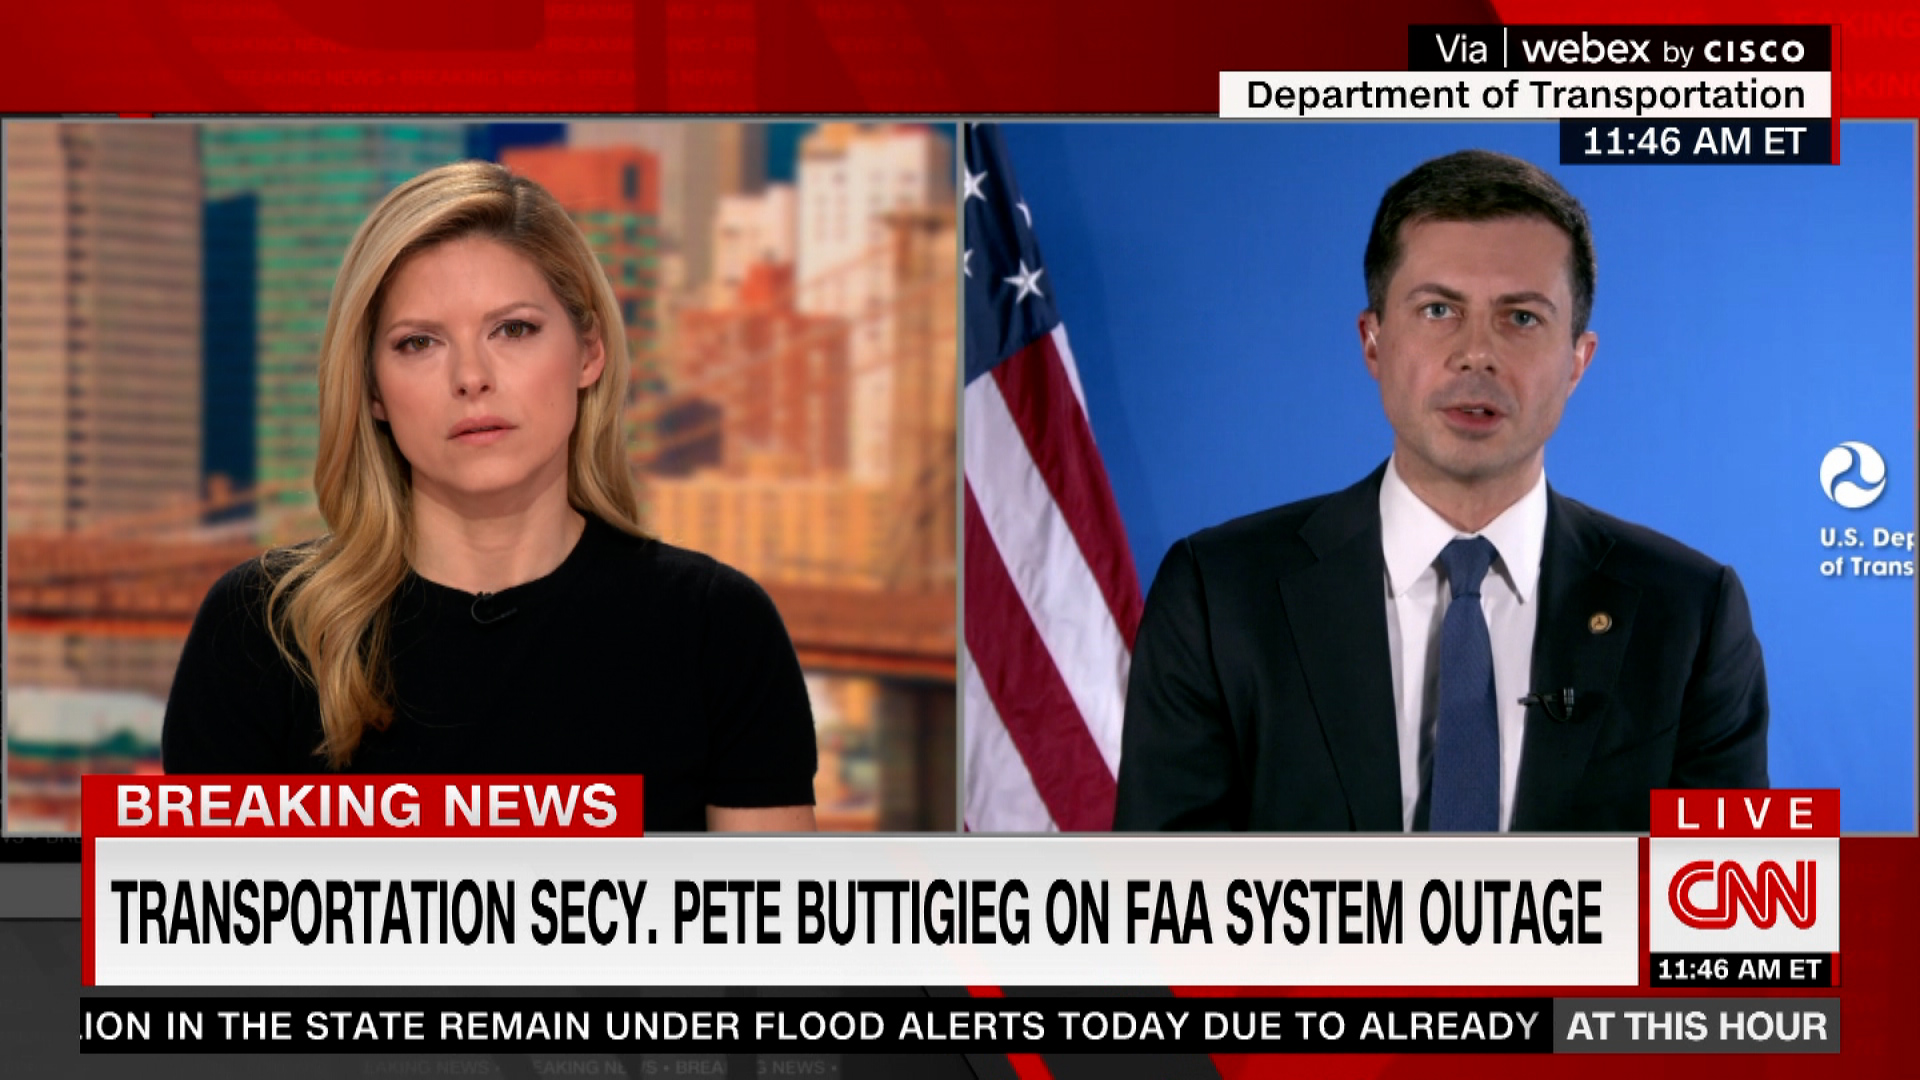 Buttigieg defends FAA’s decision to ground flights after system outage